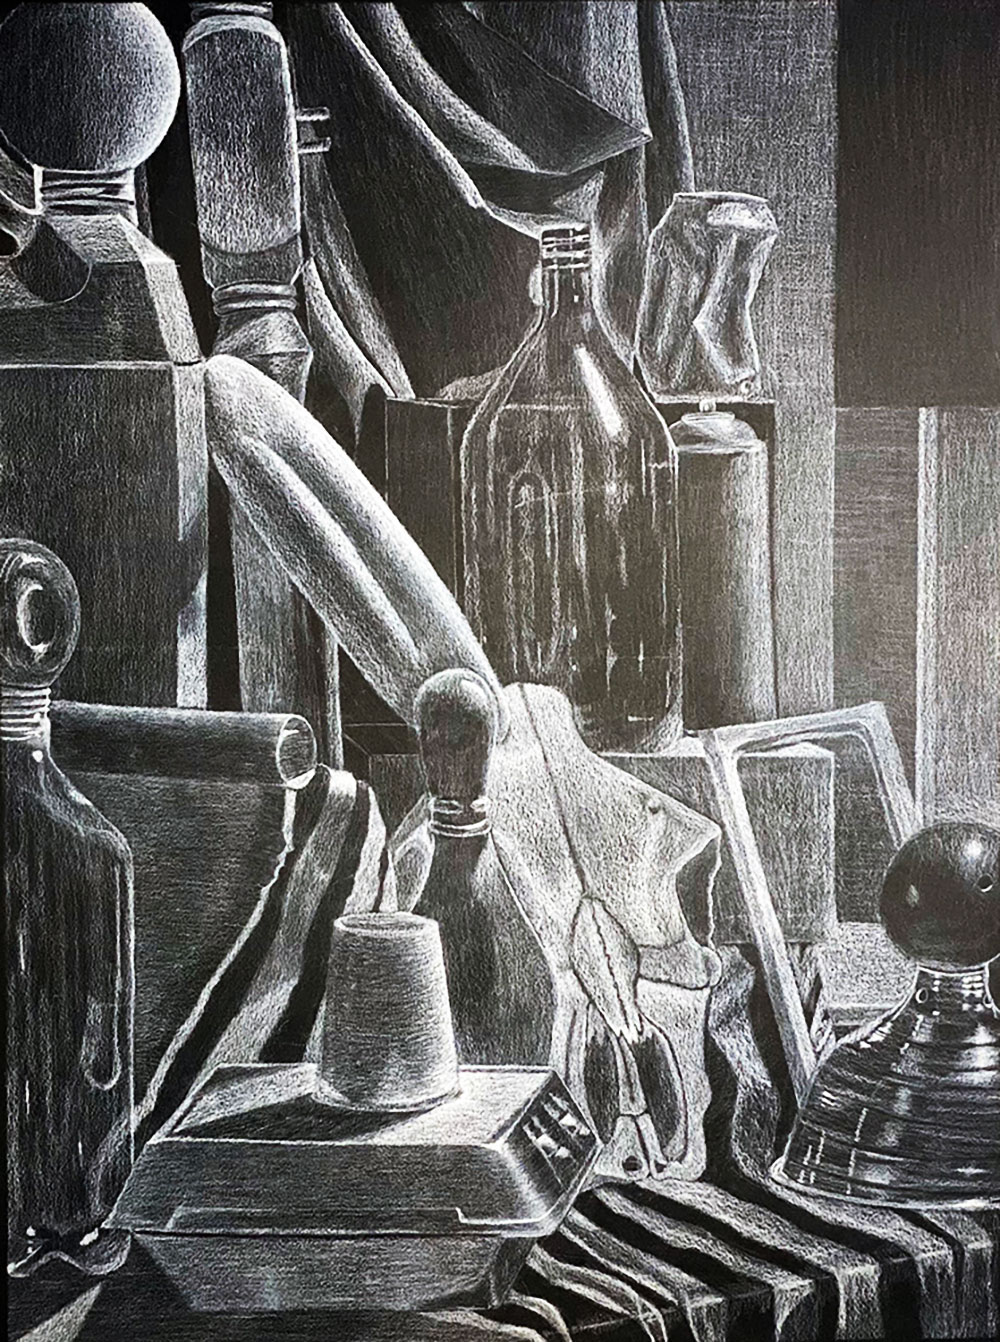 White charcoal drawing of a still life includes: bowling pins, cups, bottles, a can, and a skull.